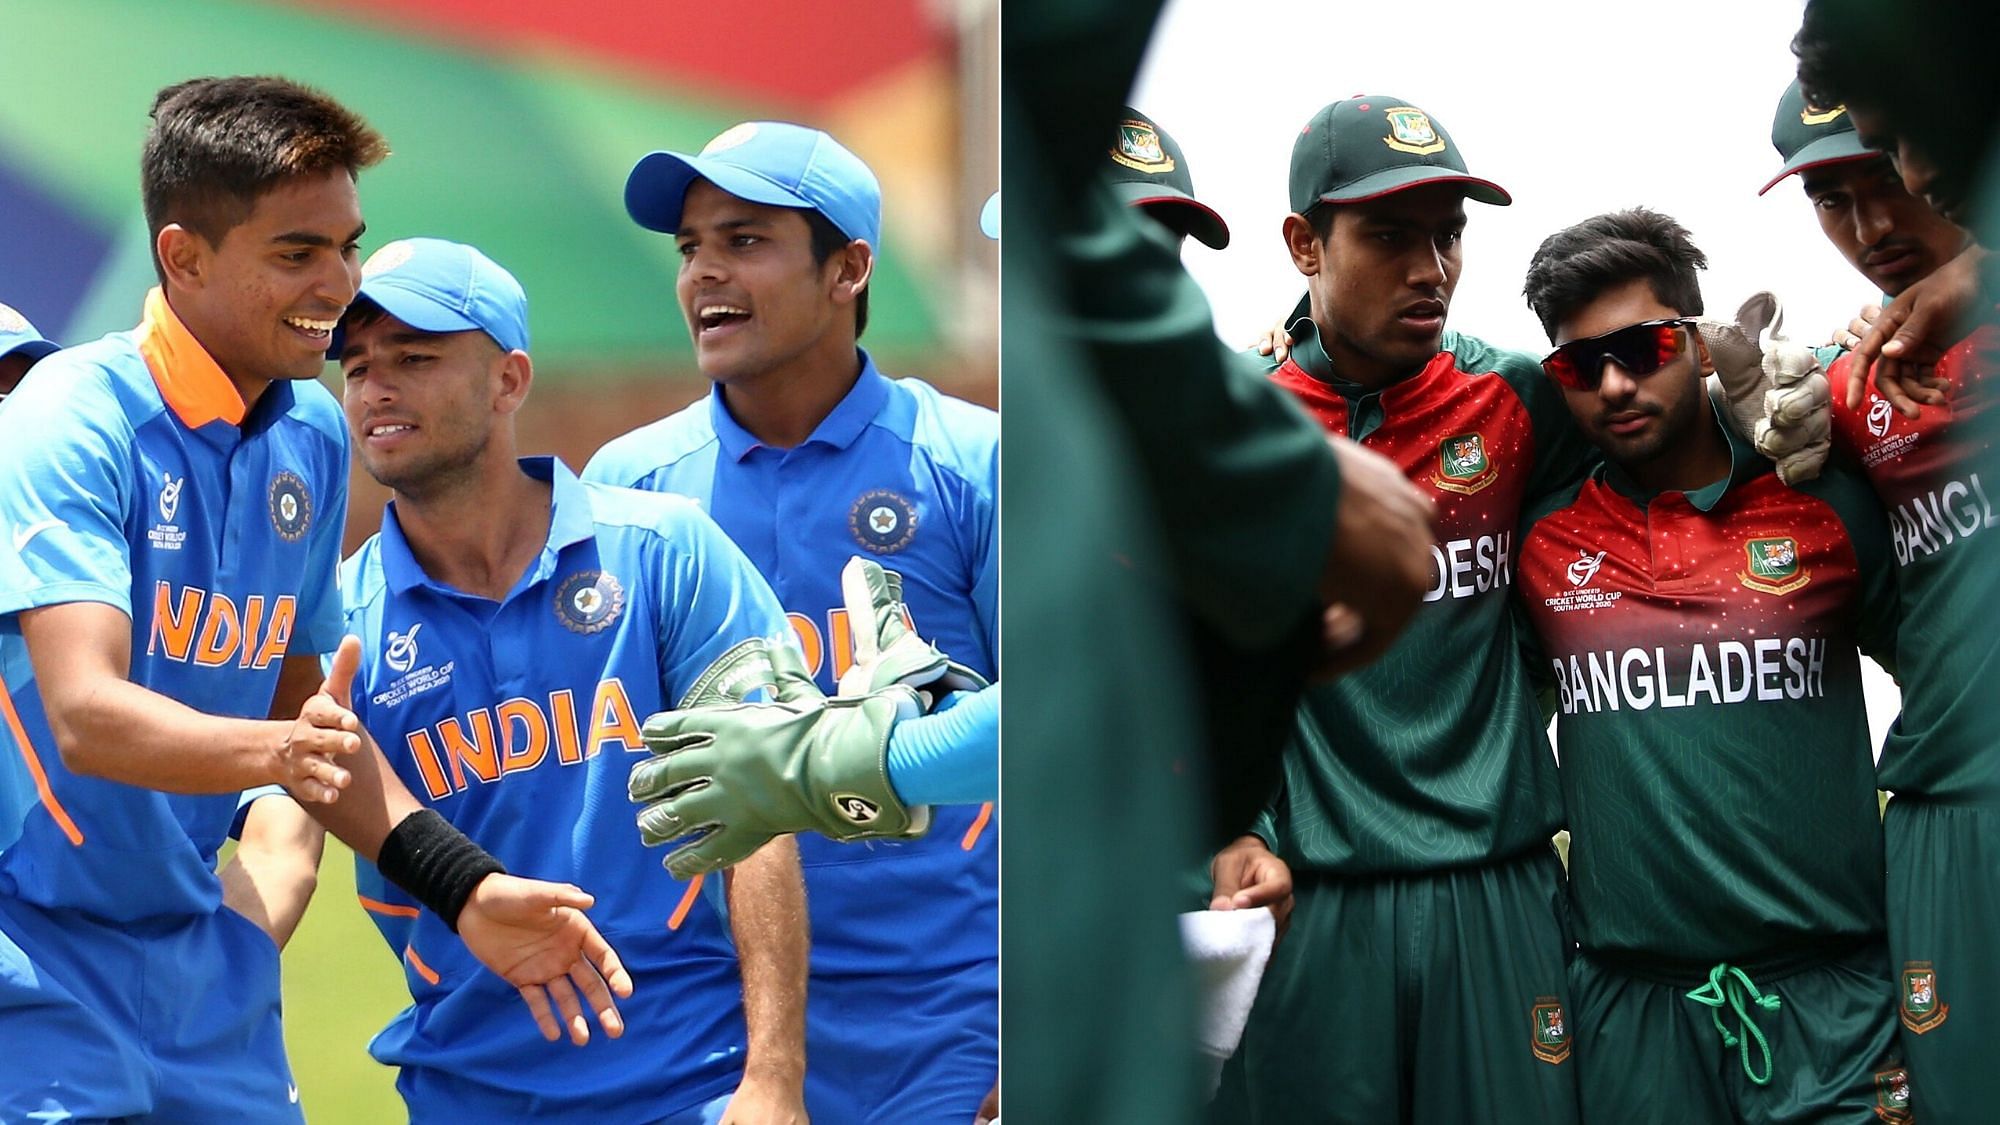 IND vs BAN LIVE Streaming: India U-19 will face Bangladesh in the ICC U-19 World Cup final cricket match on Sunday, 9 February.